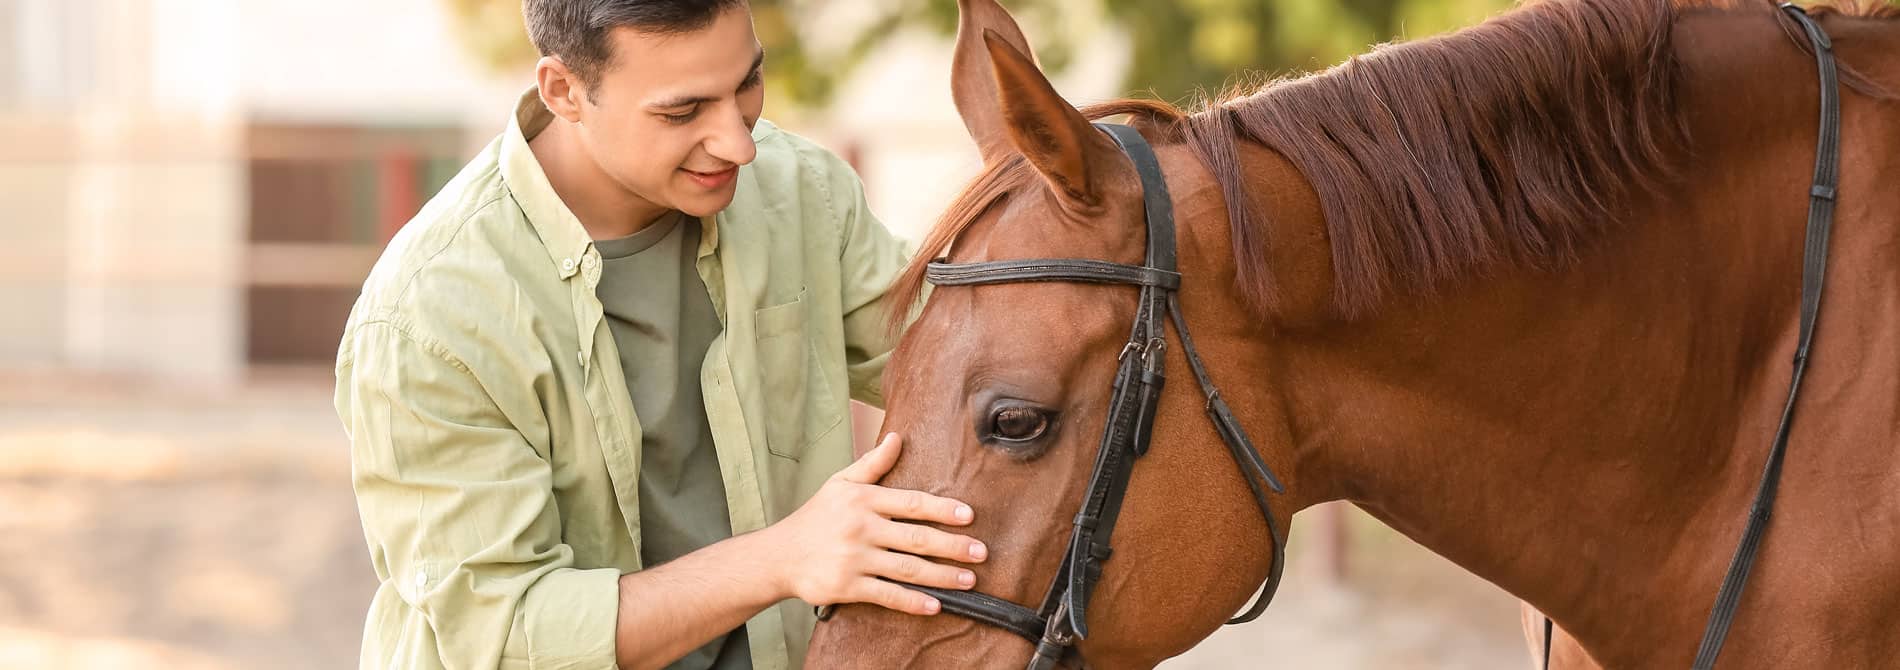 Benefits of Equine Therapy - Headwaters